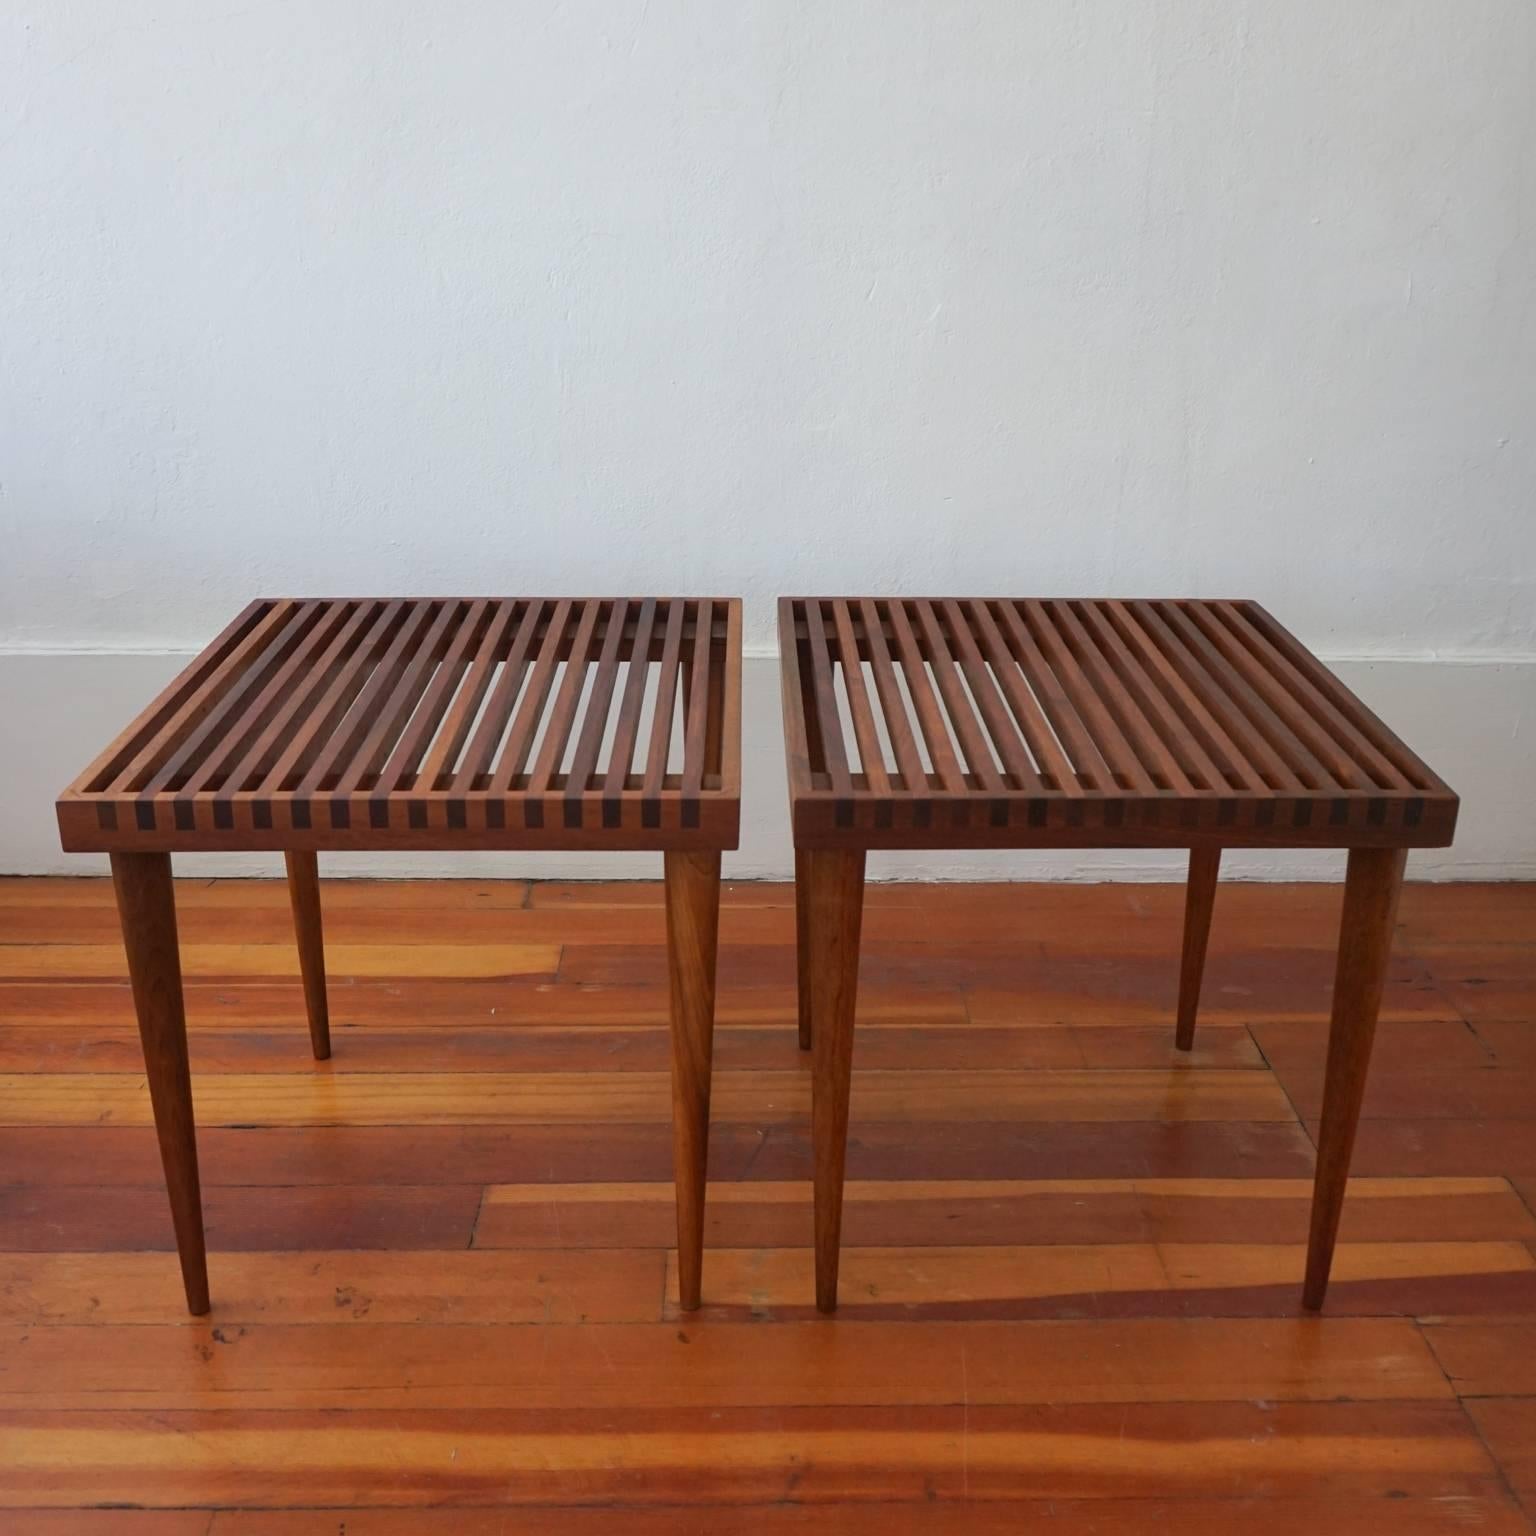 A pair of slatted side tables with tapered legs by Mel Smilow. Great construction details. Can also be stacked. 1950s.